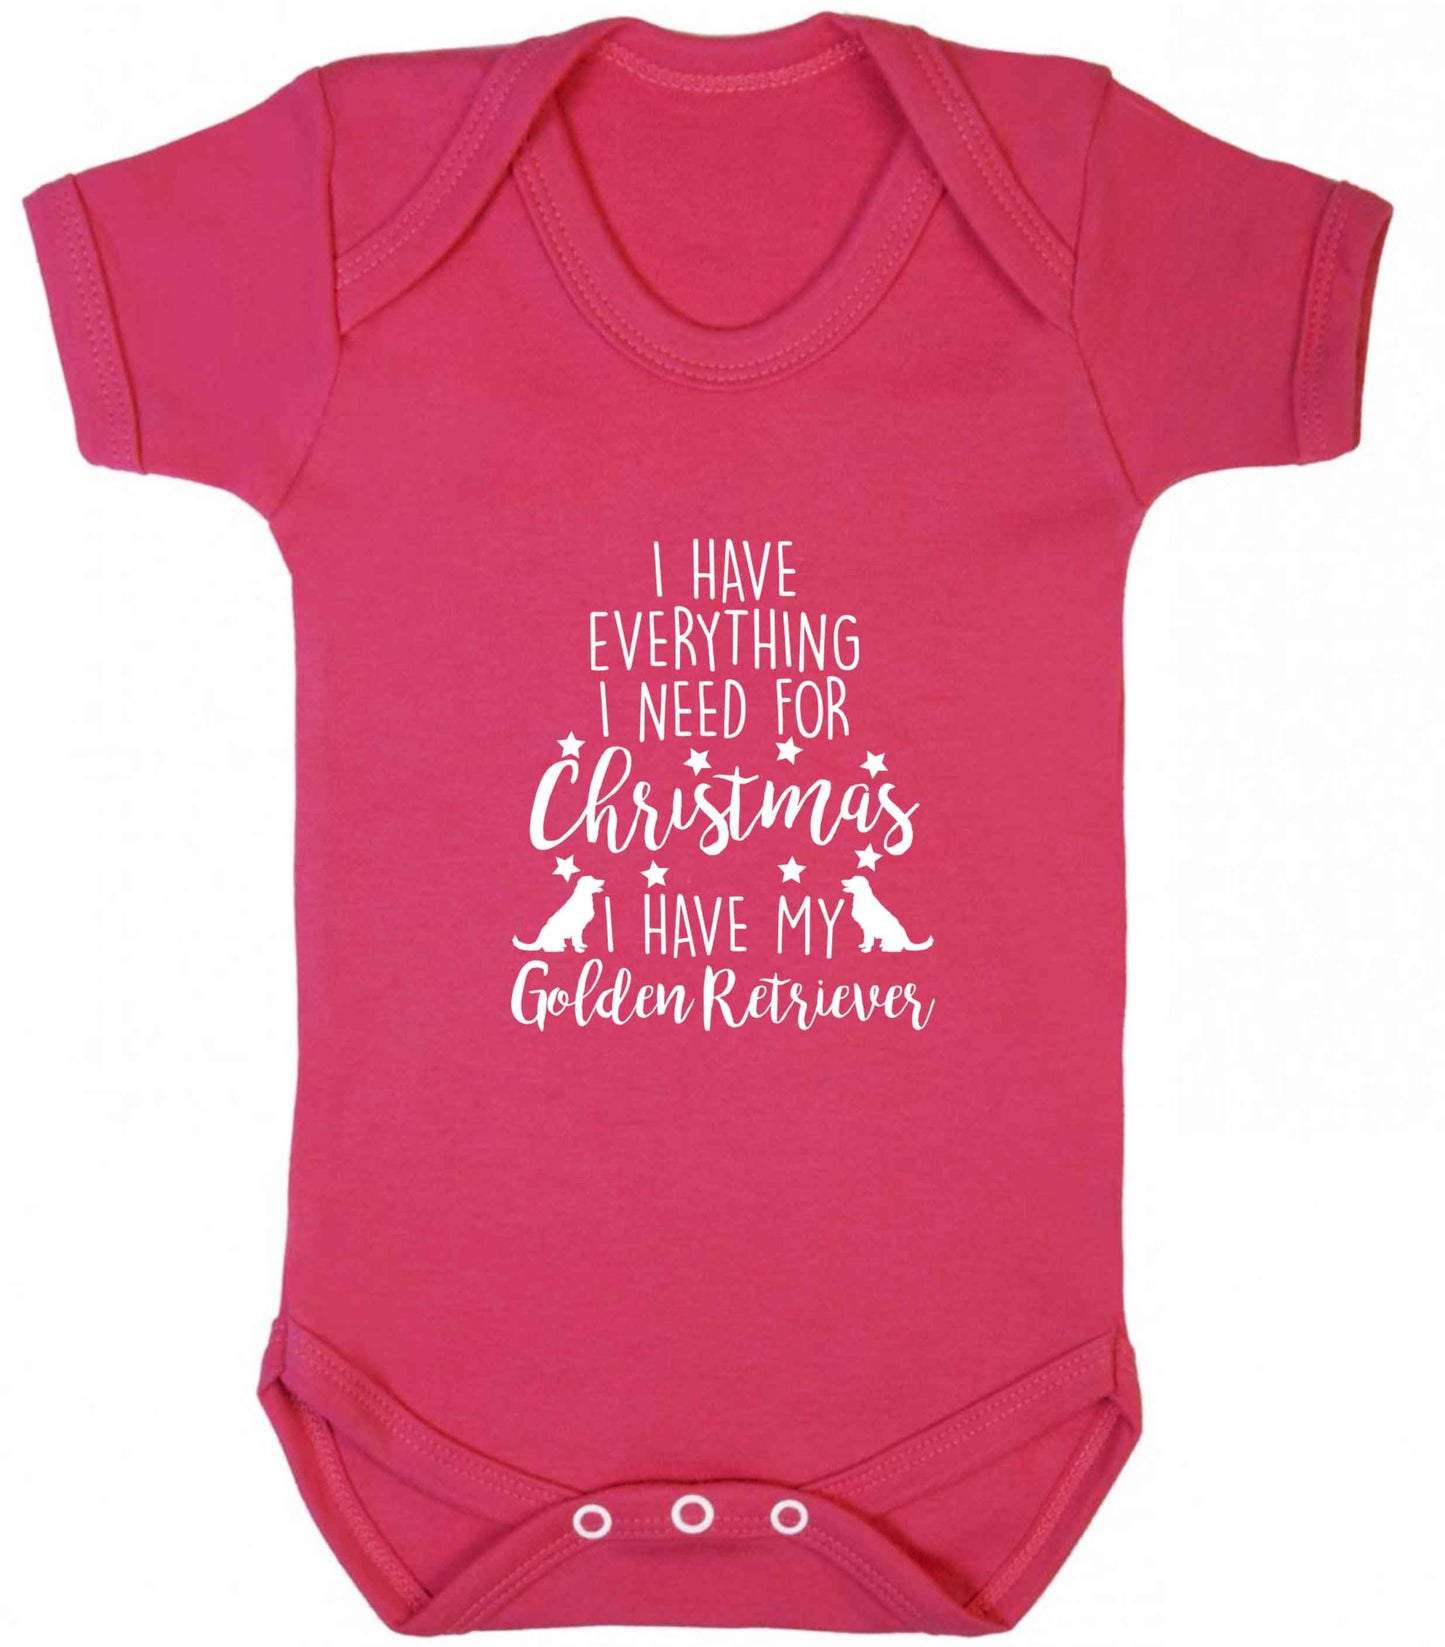 I have everything I need for Christmas I have my golden retriever baby vest dark pink 18-24 months